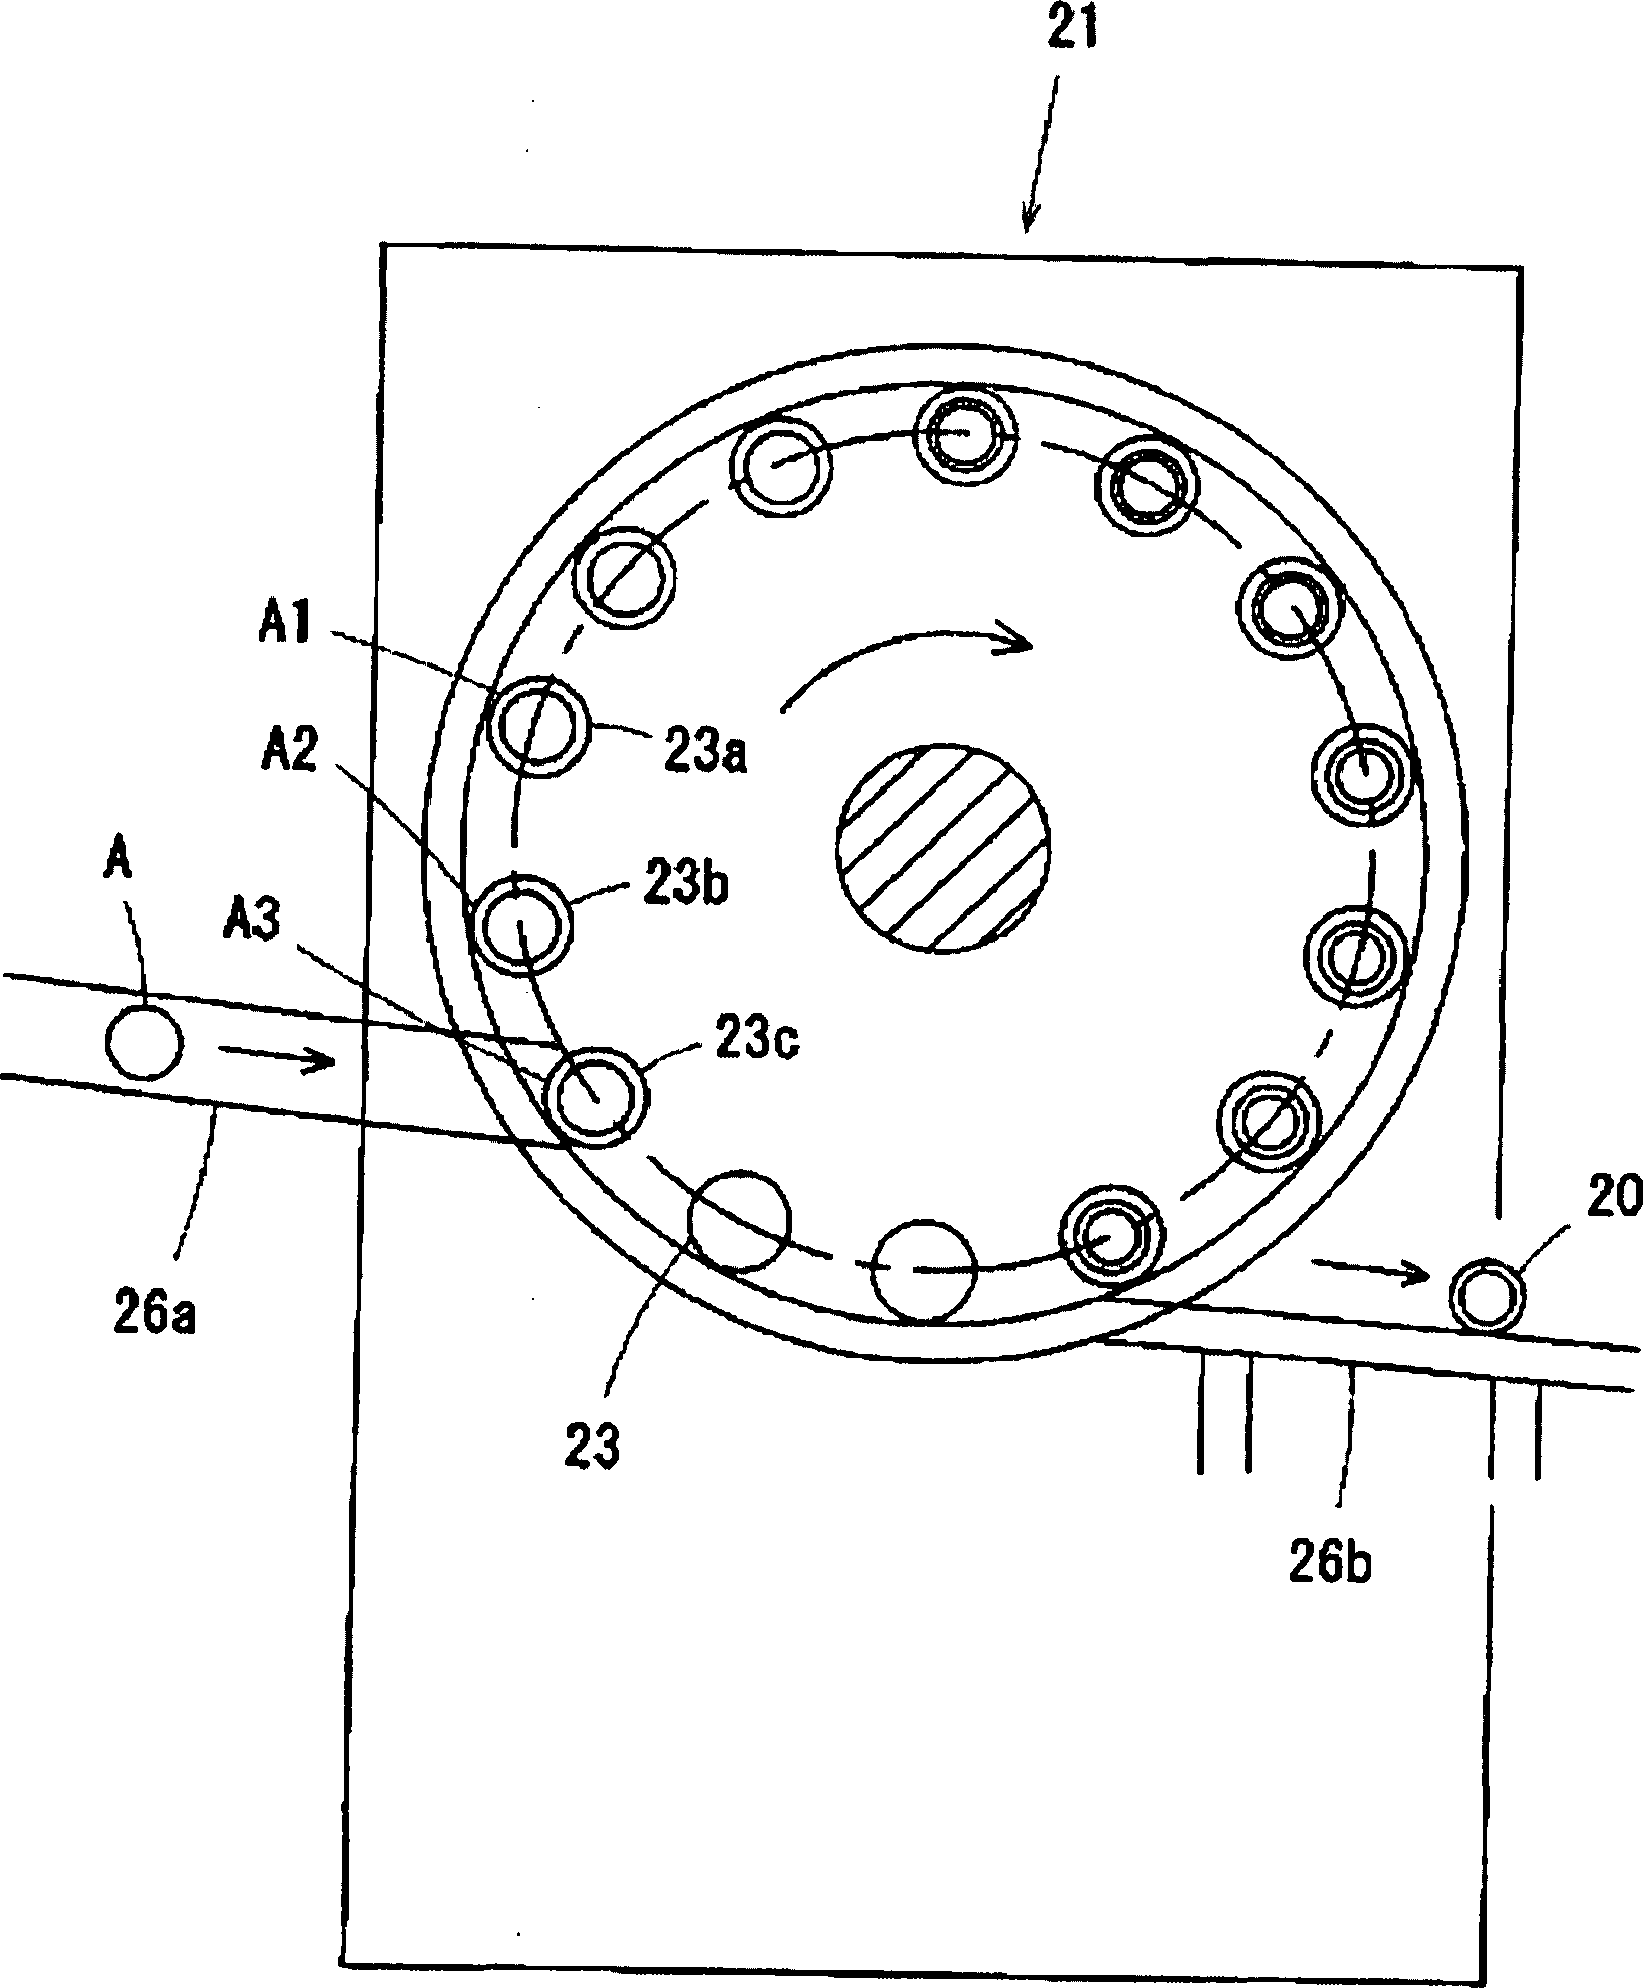 Method for producing double aerosol container, double aerosol container, and apparatus for producing double aerosol container